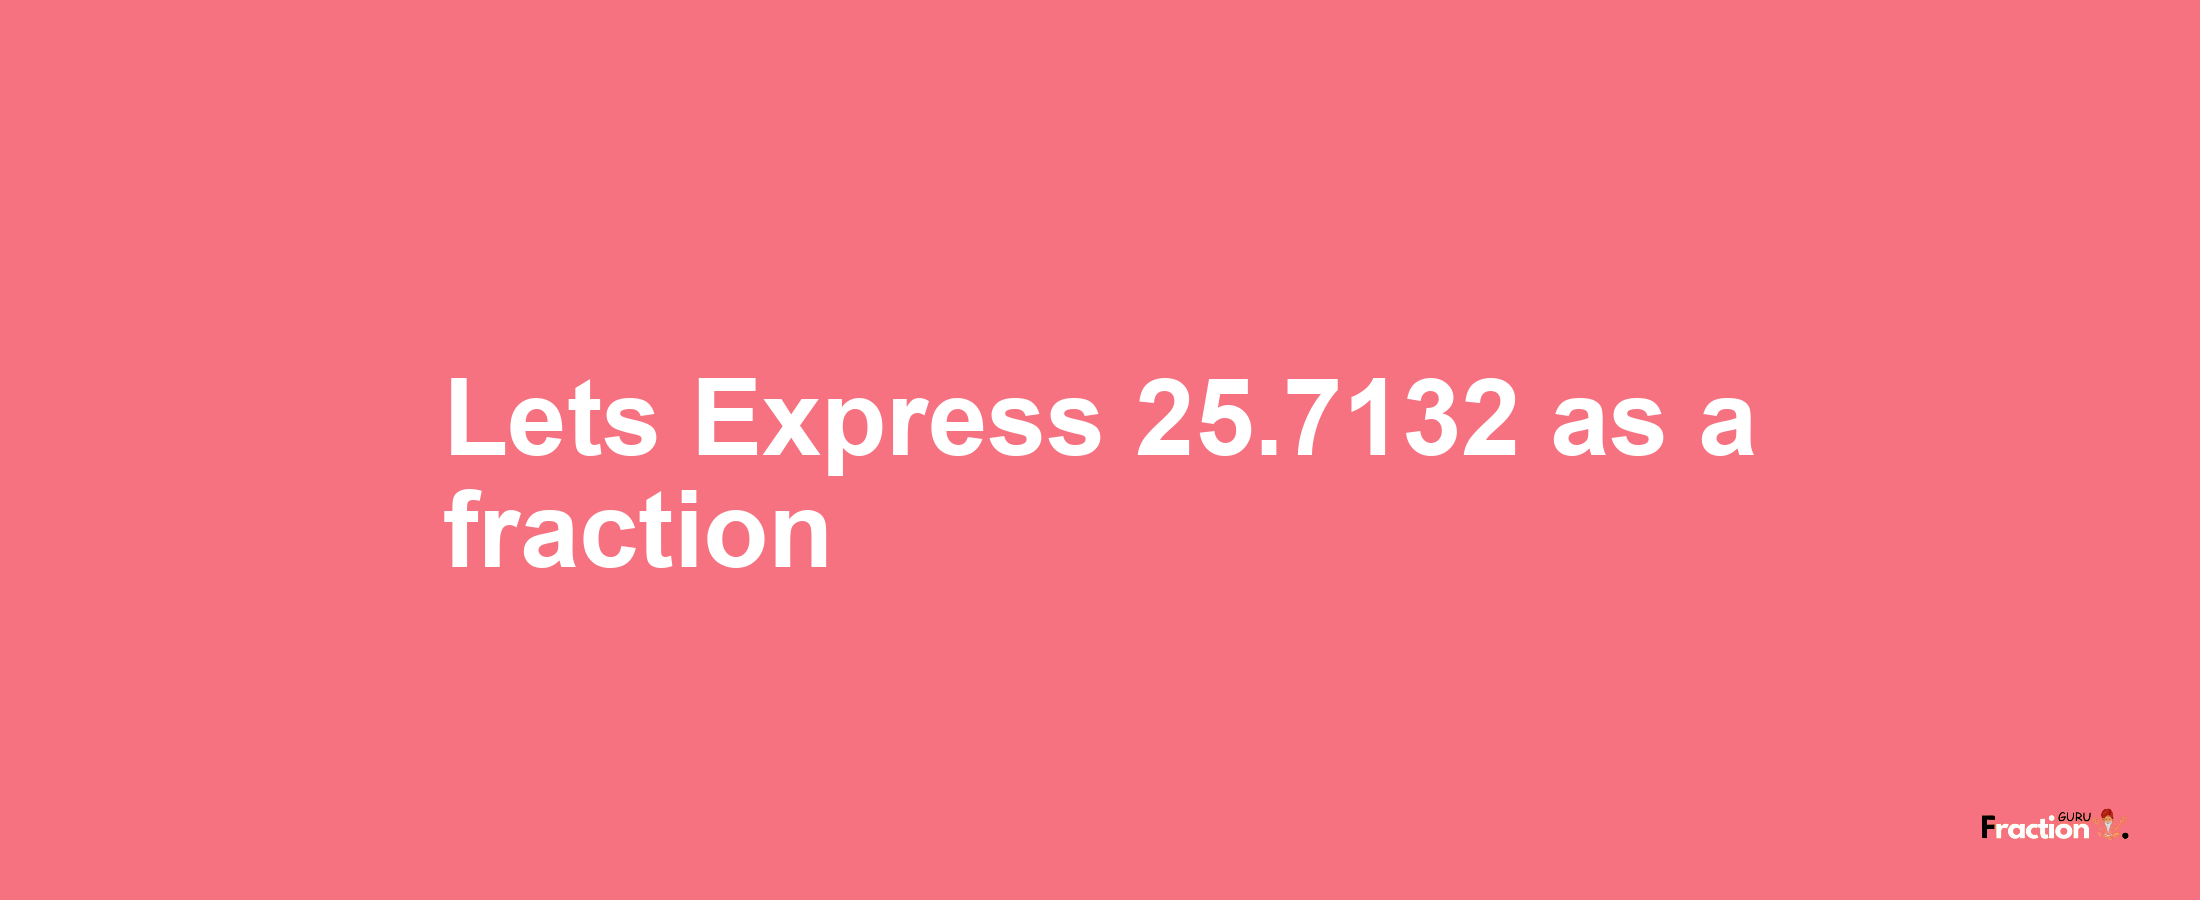 Lets Express 25.7132 as afraction